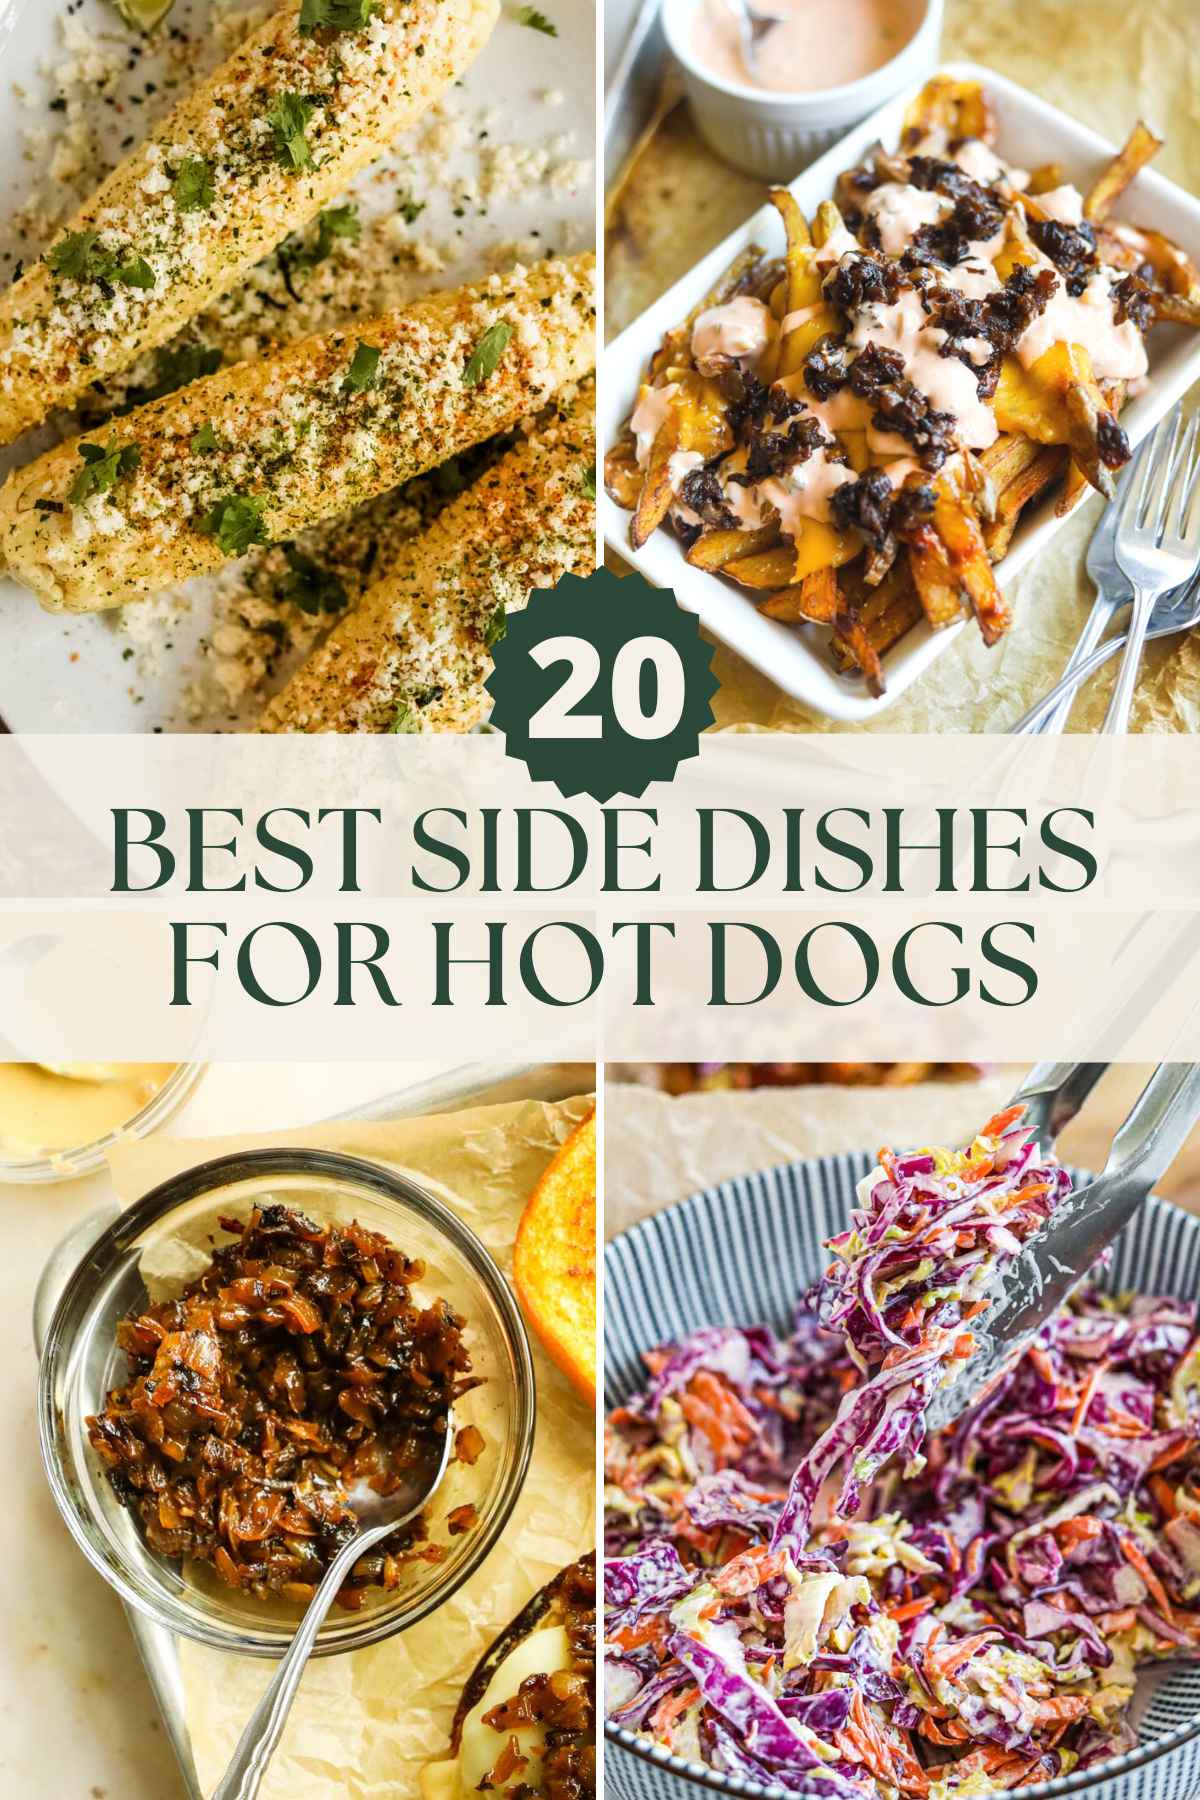 20 best side dishes for hot dogs, including corn, animal-style fries, grilled onions, and coleslaw.